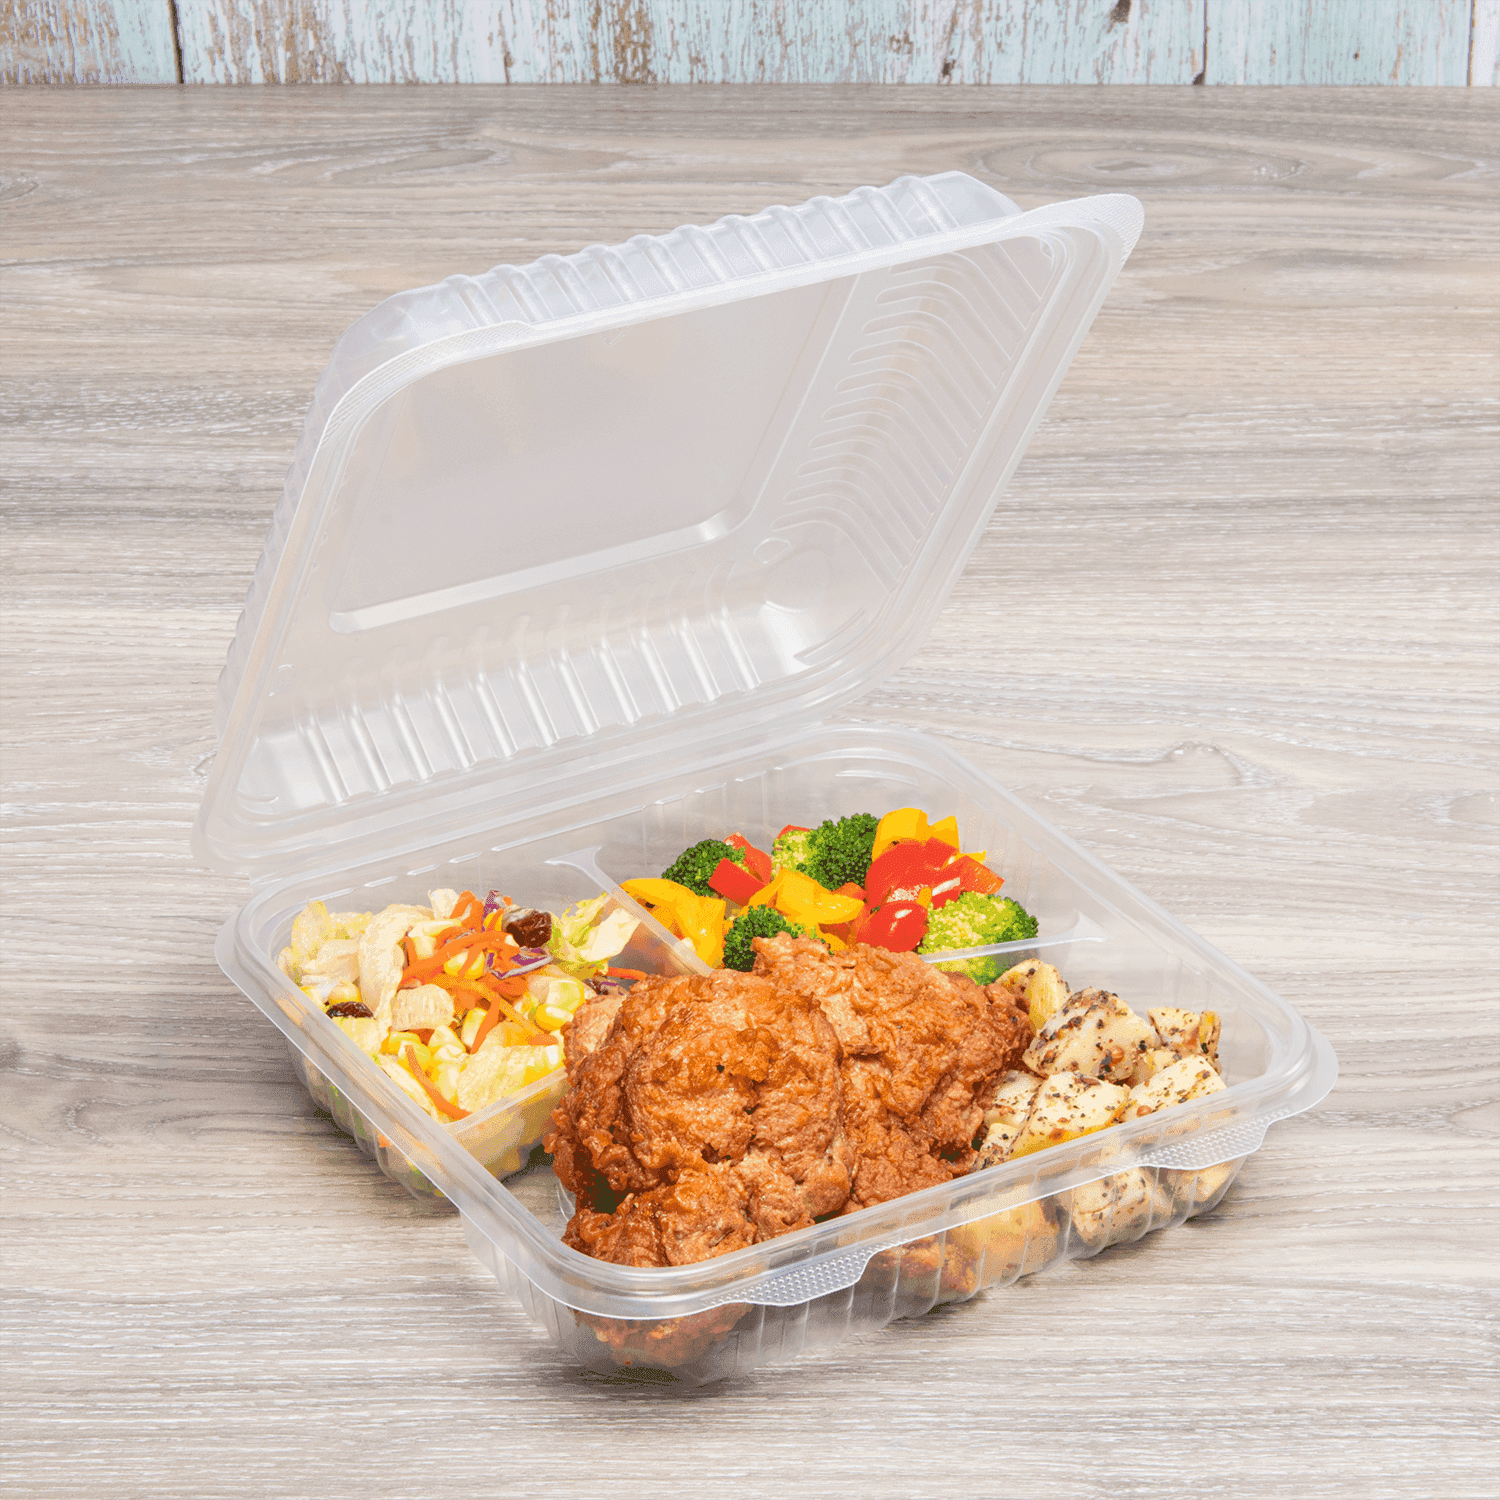 Karat 9" x 9" PP Plastic Hinged Containers with 3 Compartments open with food